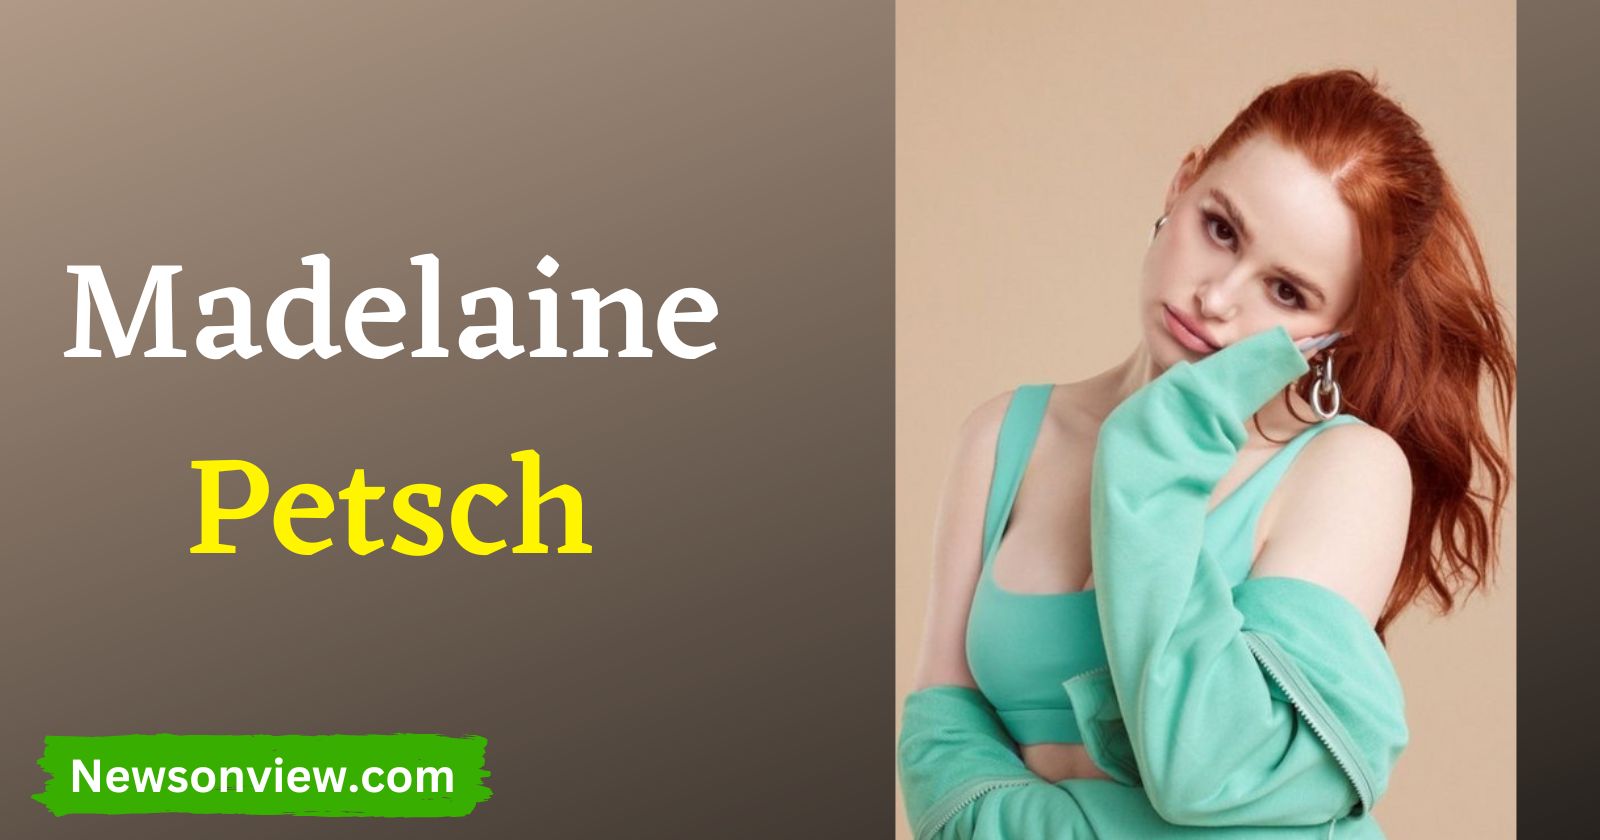 Madelaine Petsch Biography, Age, Height, Boyfriends, Family, Parents, Fansite, Movies & More